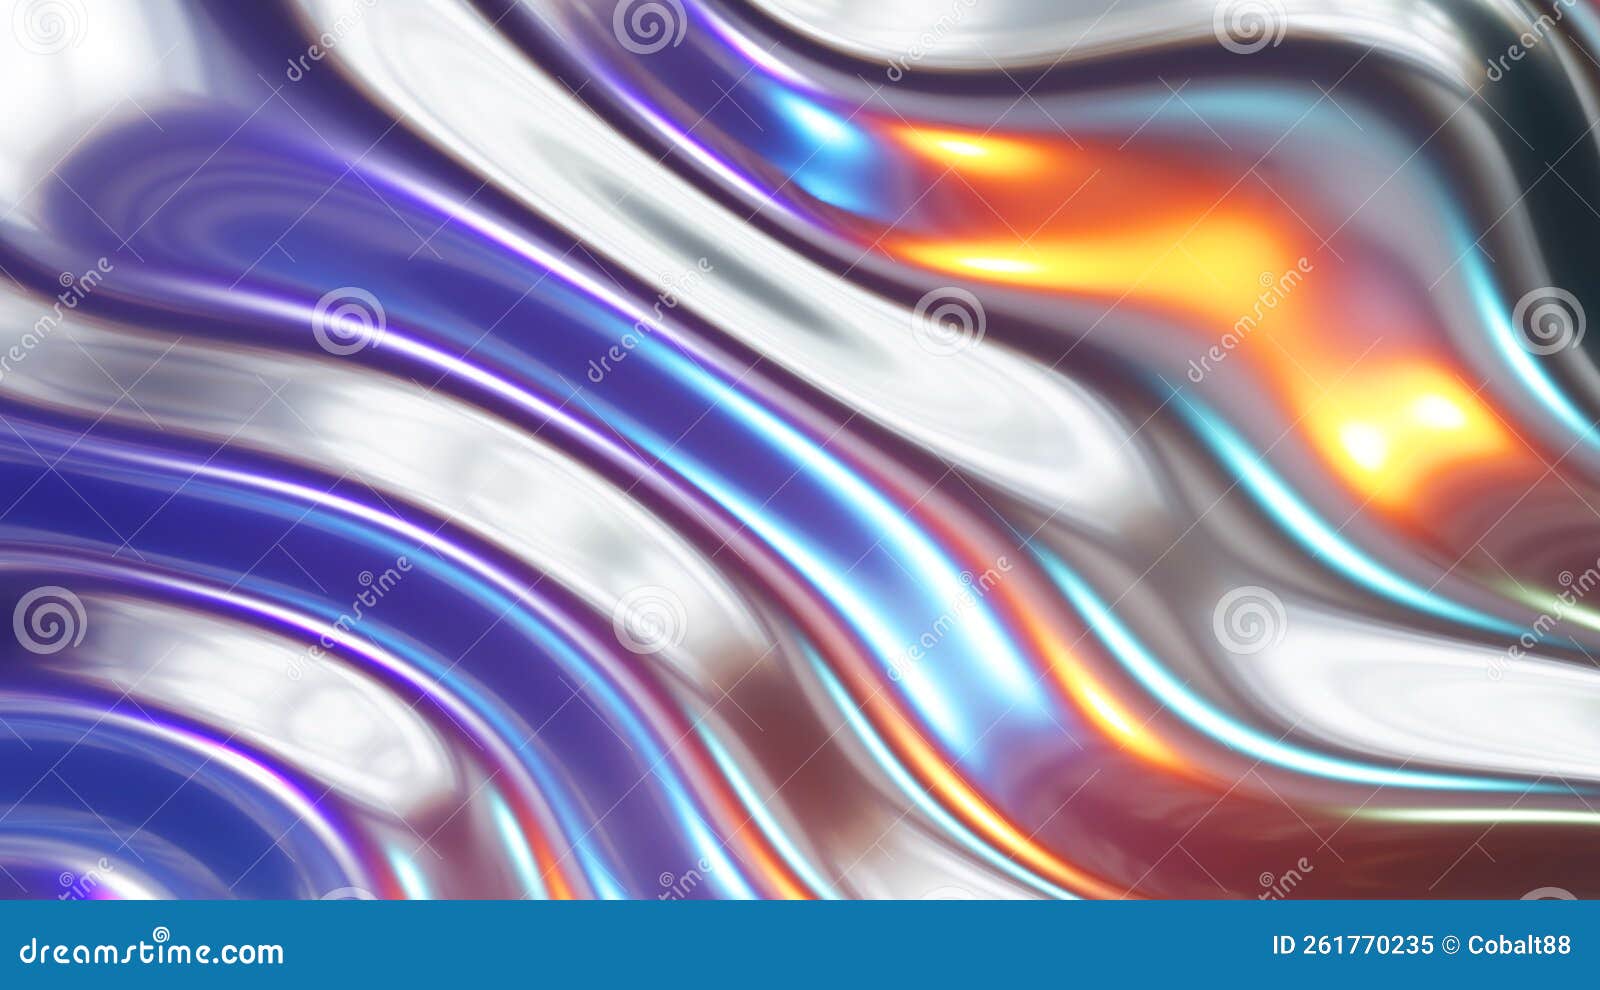 Liquid chrome abstract silver wavy surface. Silver metal for background or  texture. Stock Illustration